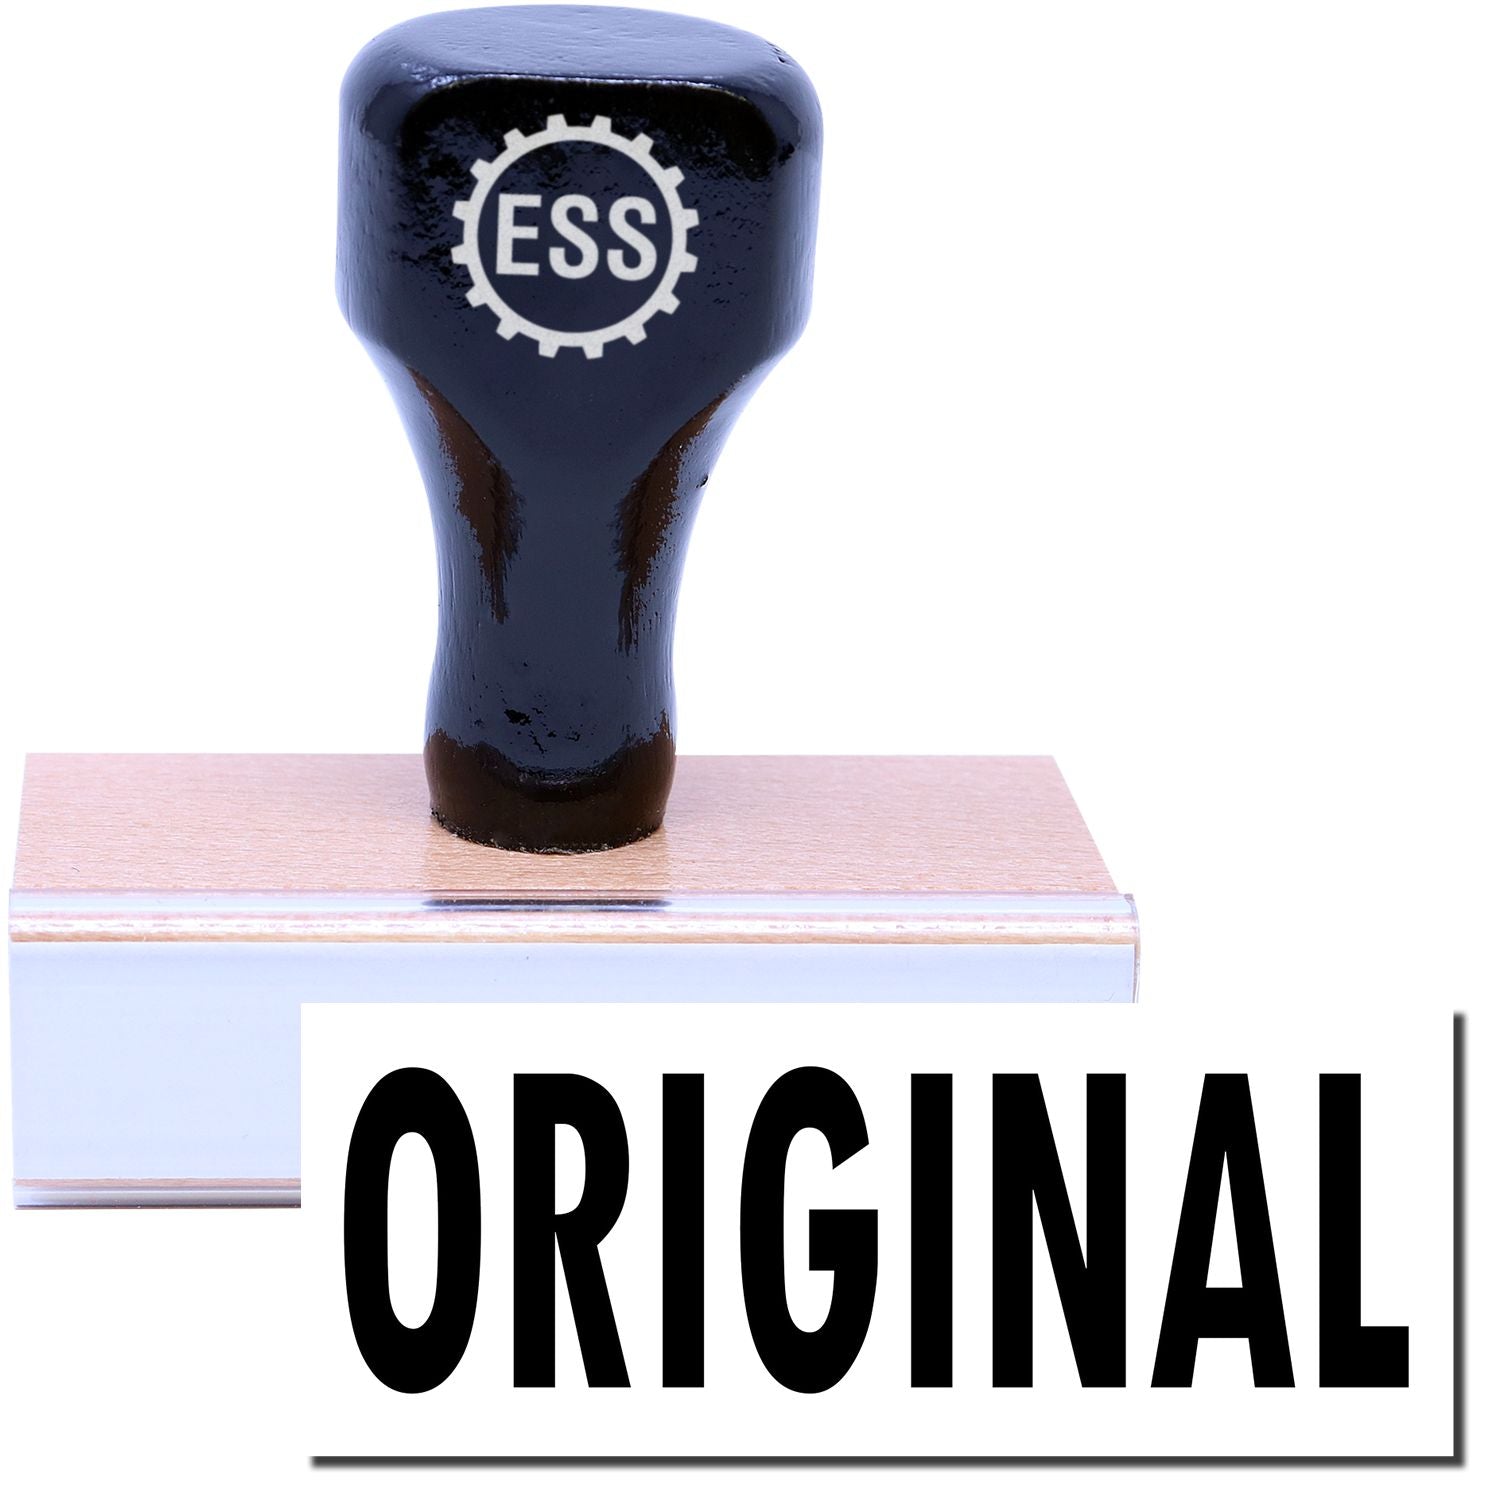 A stock office rubber stamp with a stamped image showing how the text "ORIGINAL" in a large font is displayed after stamping.